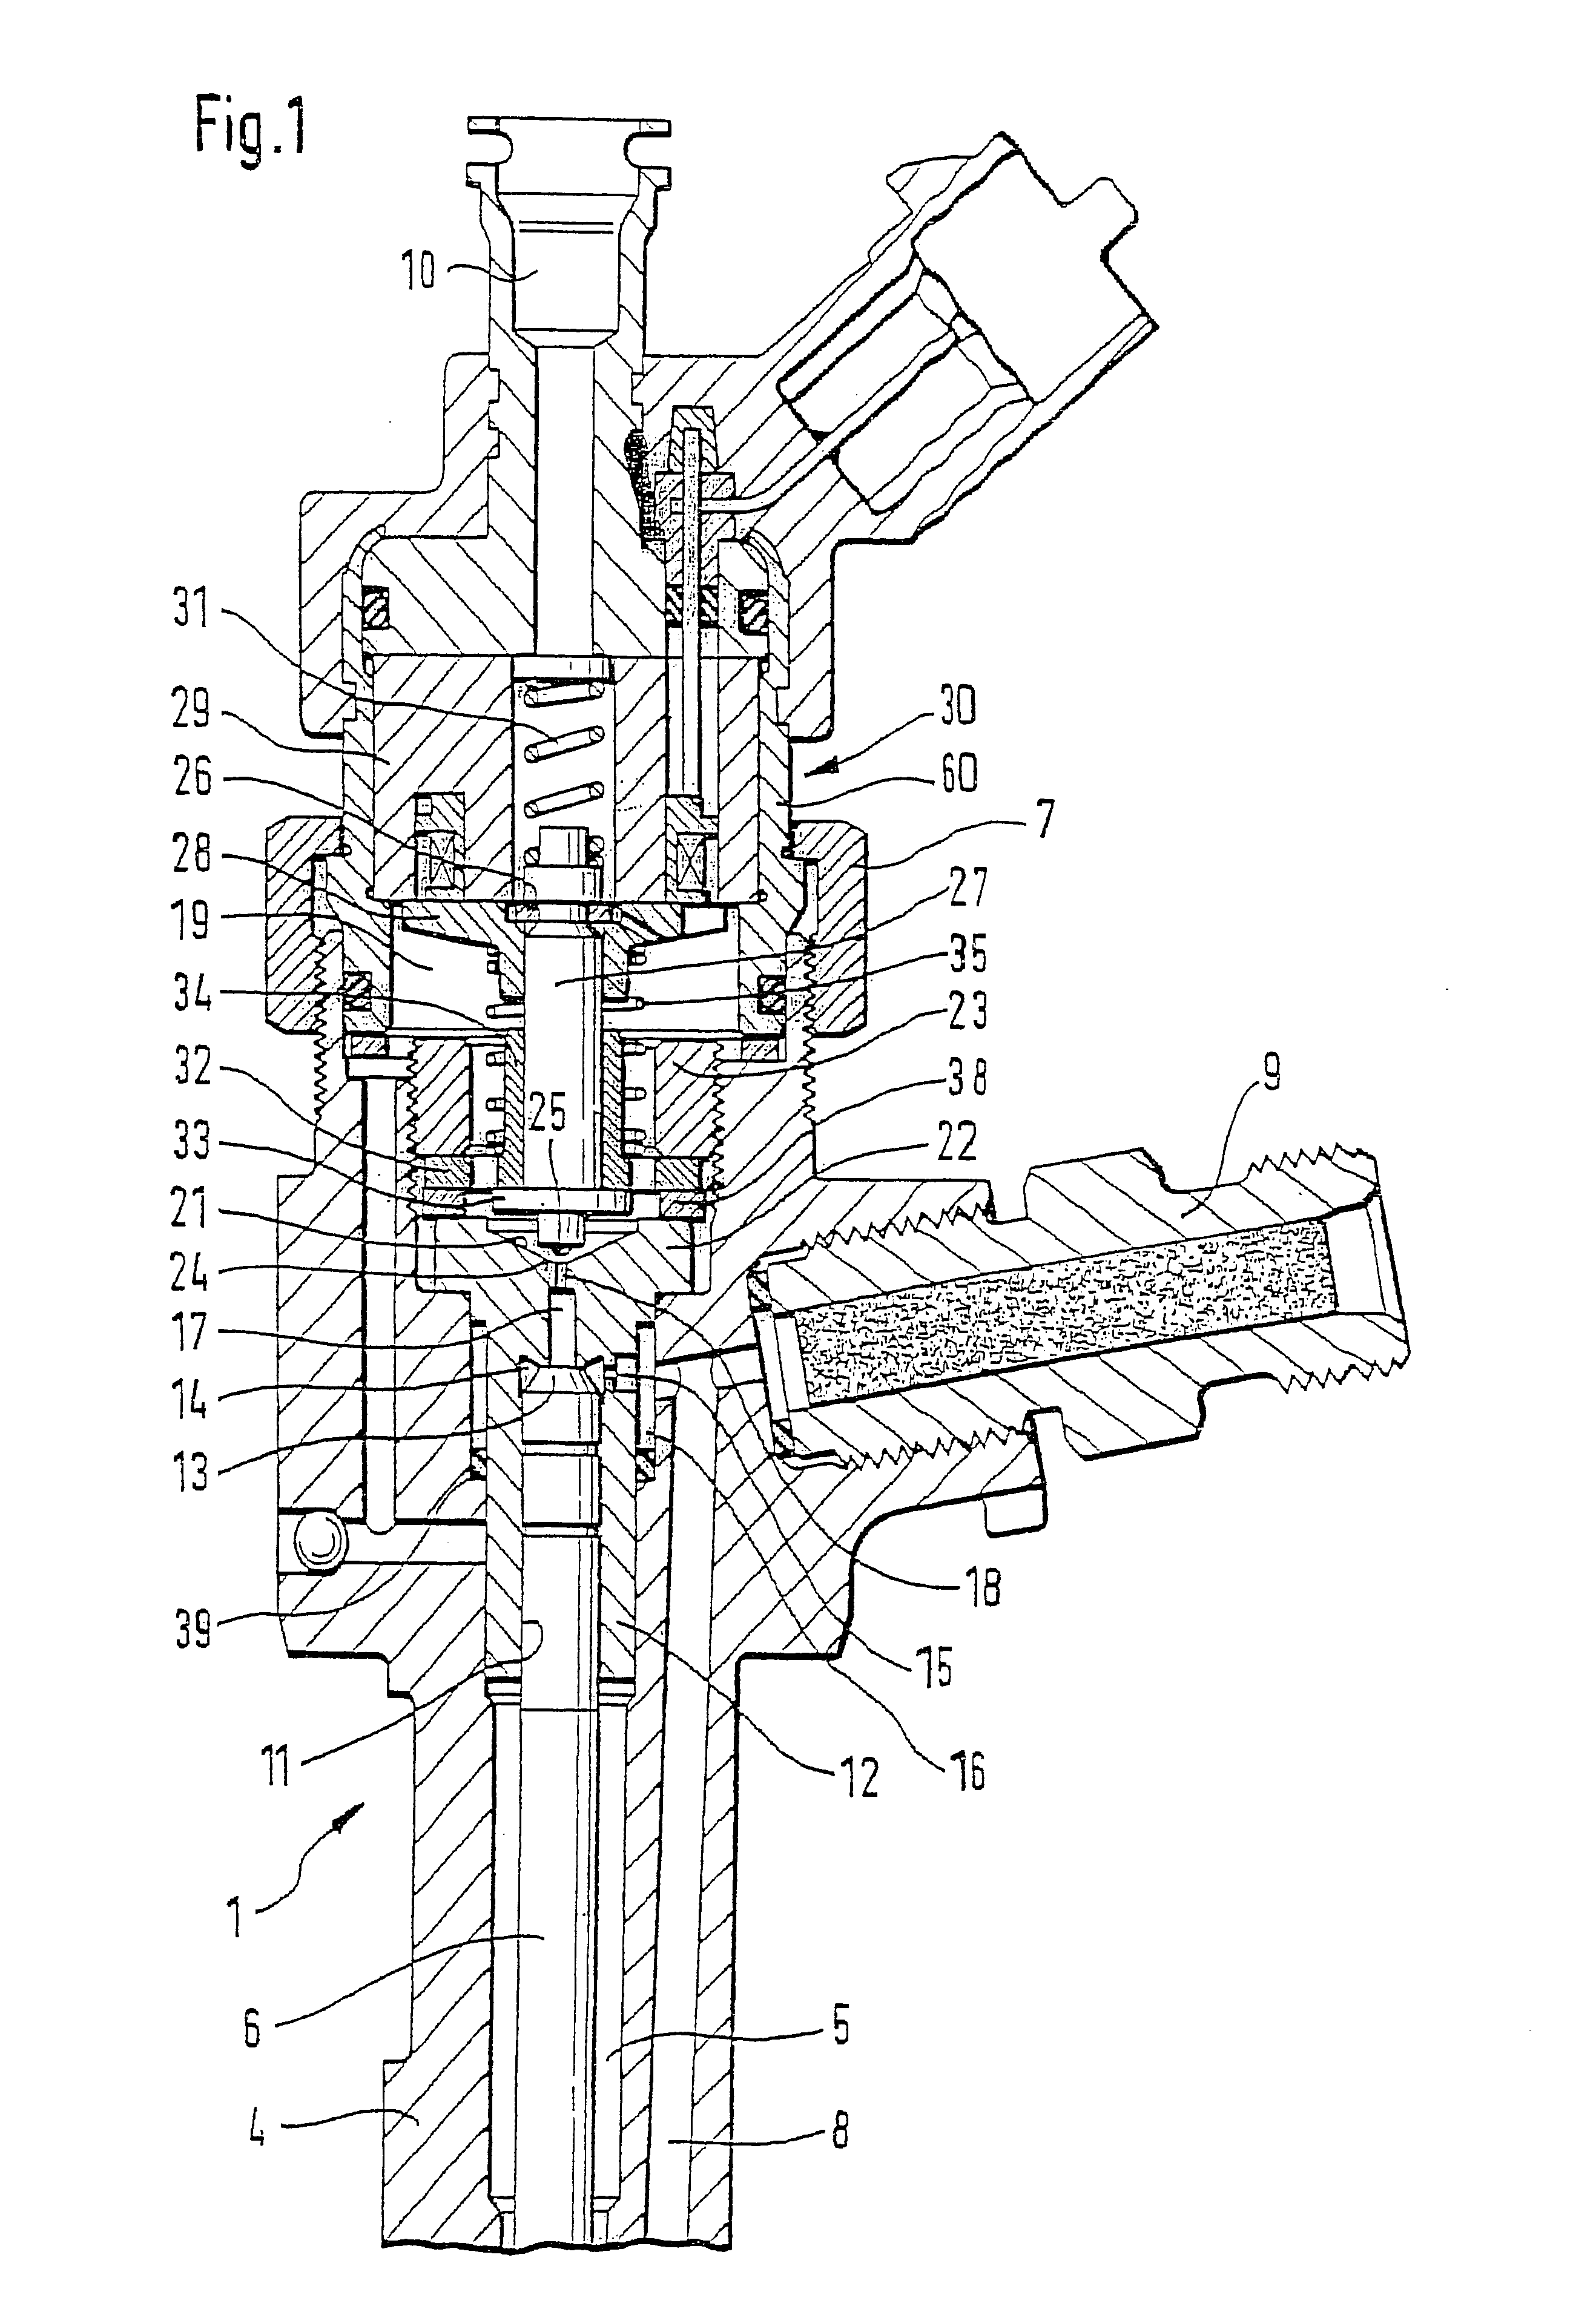 Solenoid valve for controlling a fuel injector of an internal combustion engine